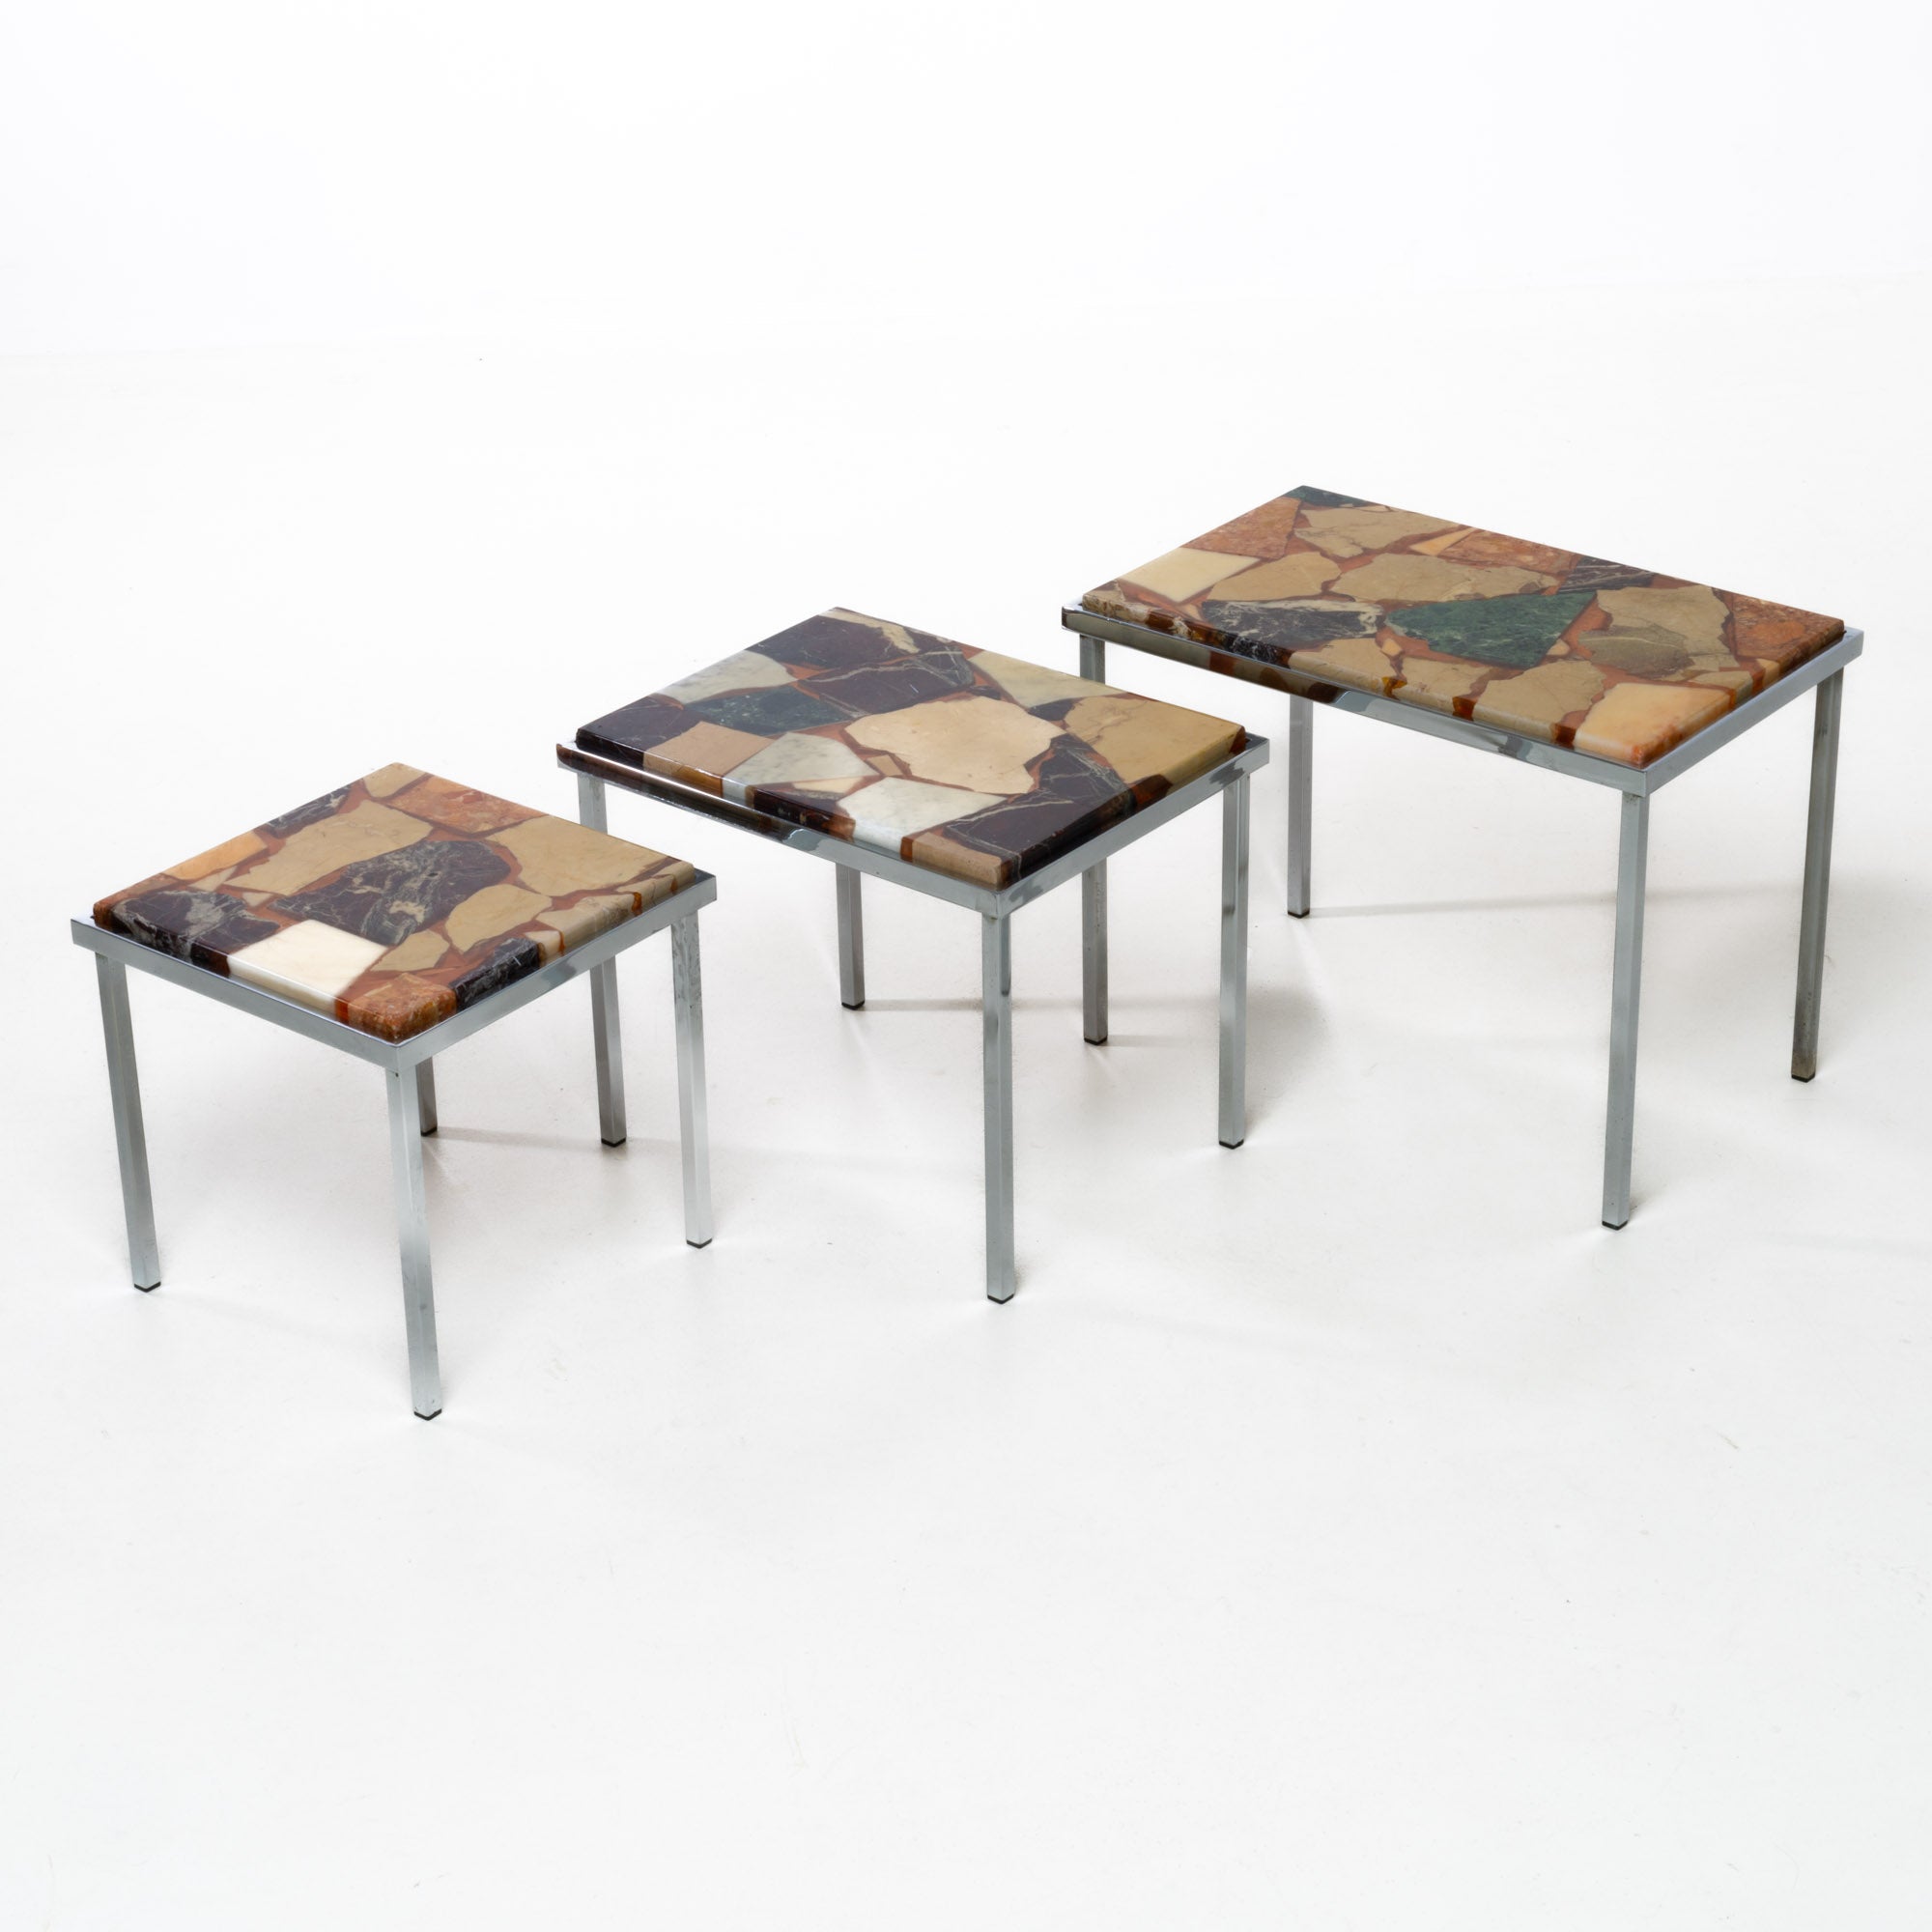 DECORATIVE SET OF THREE SIDE-TABLES, 1960S